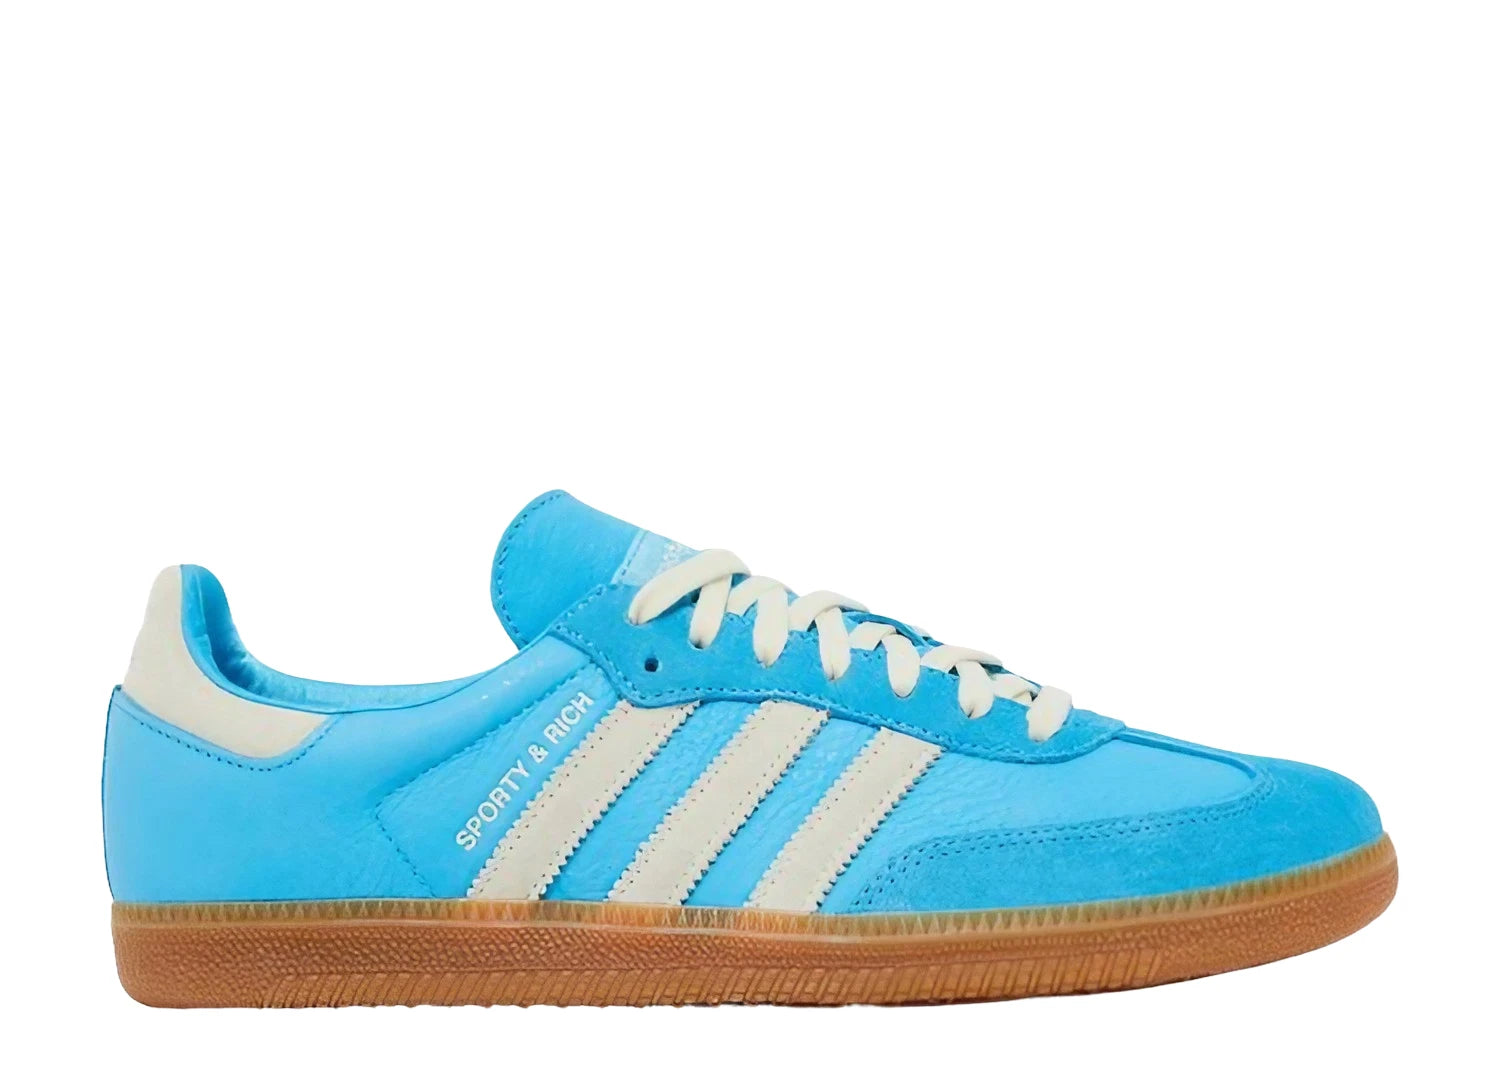 adidas Samba - OG Sporty & Rich Blue Rush Shoes | Sole Quest Sneakers